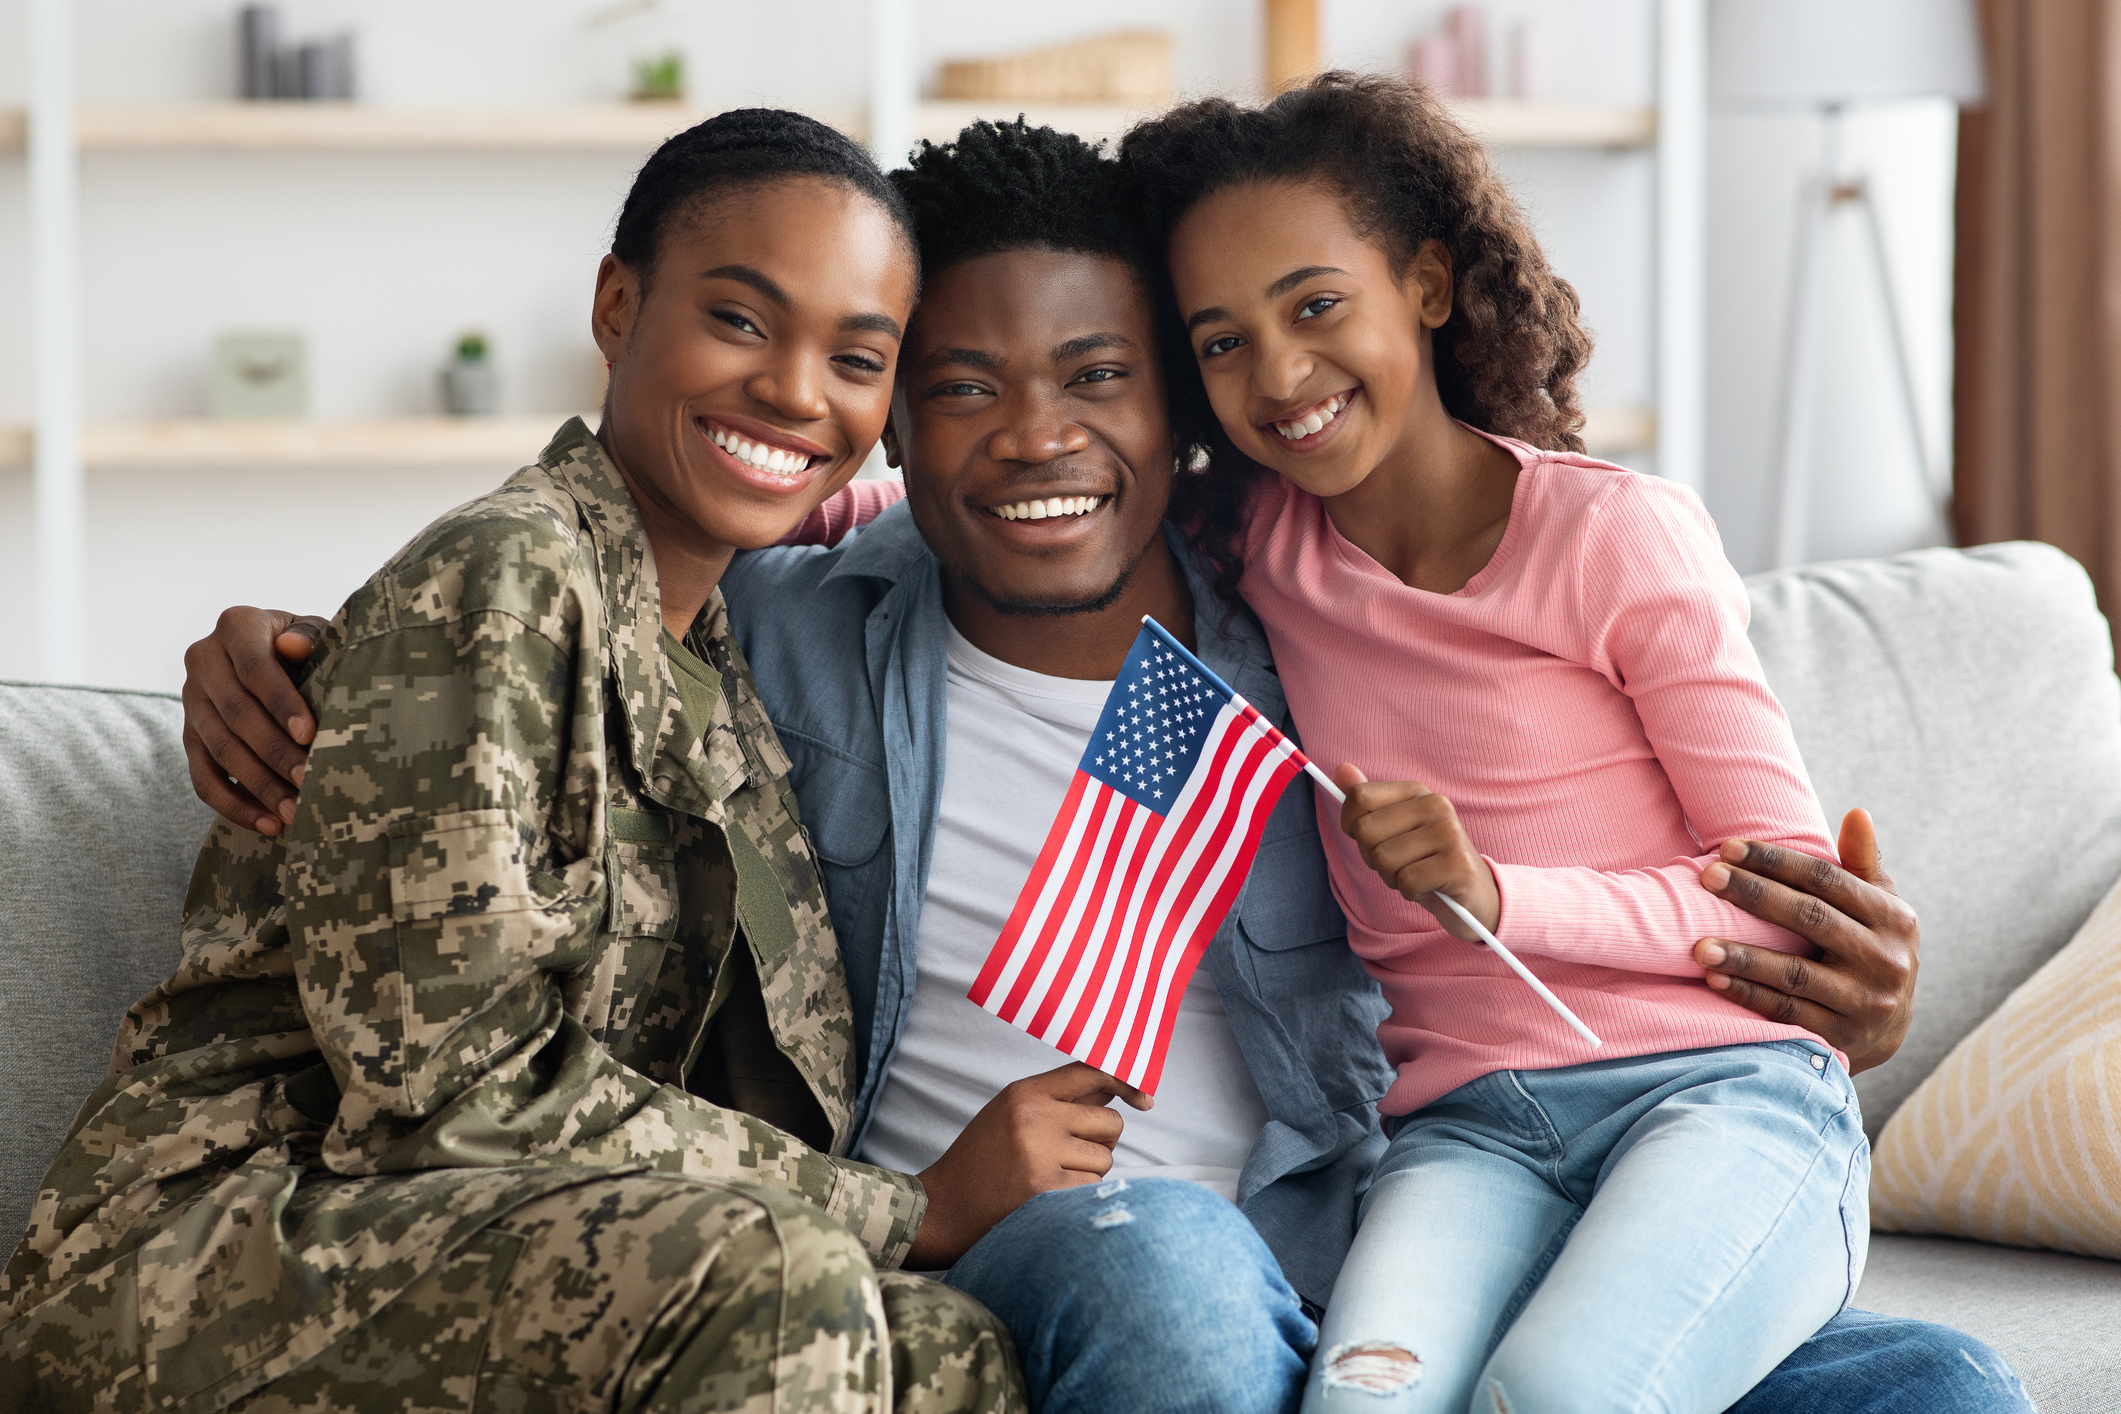 Military family smiling together on couch holding American flag